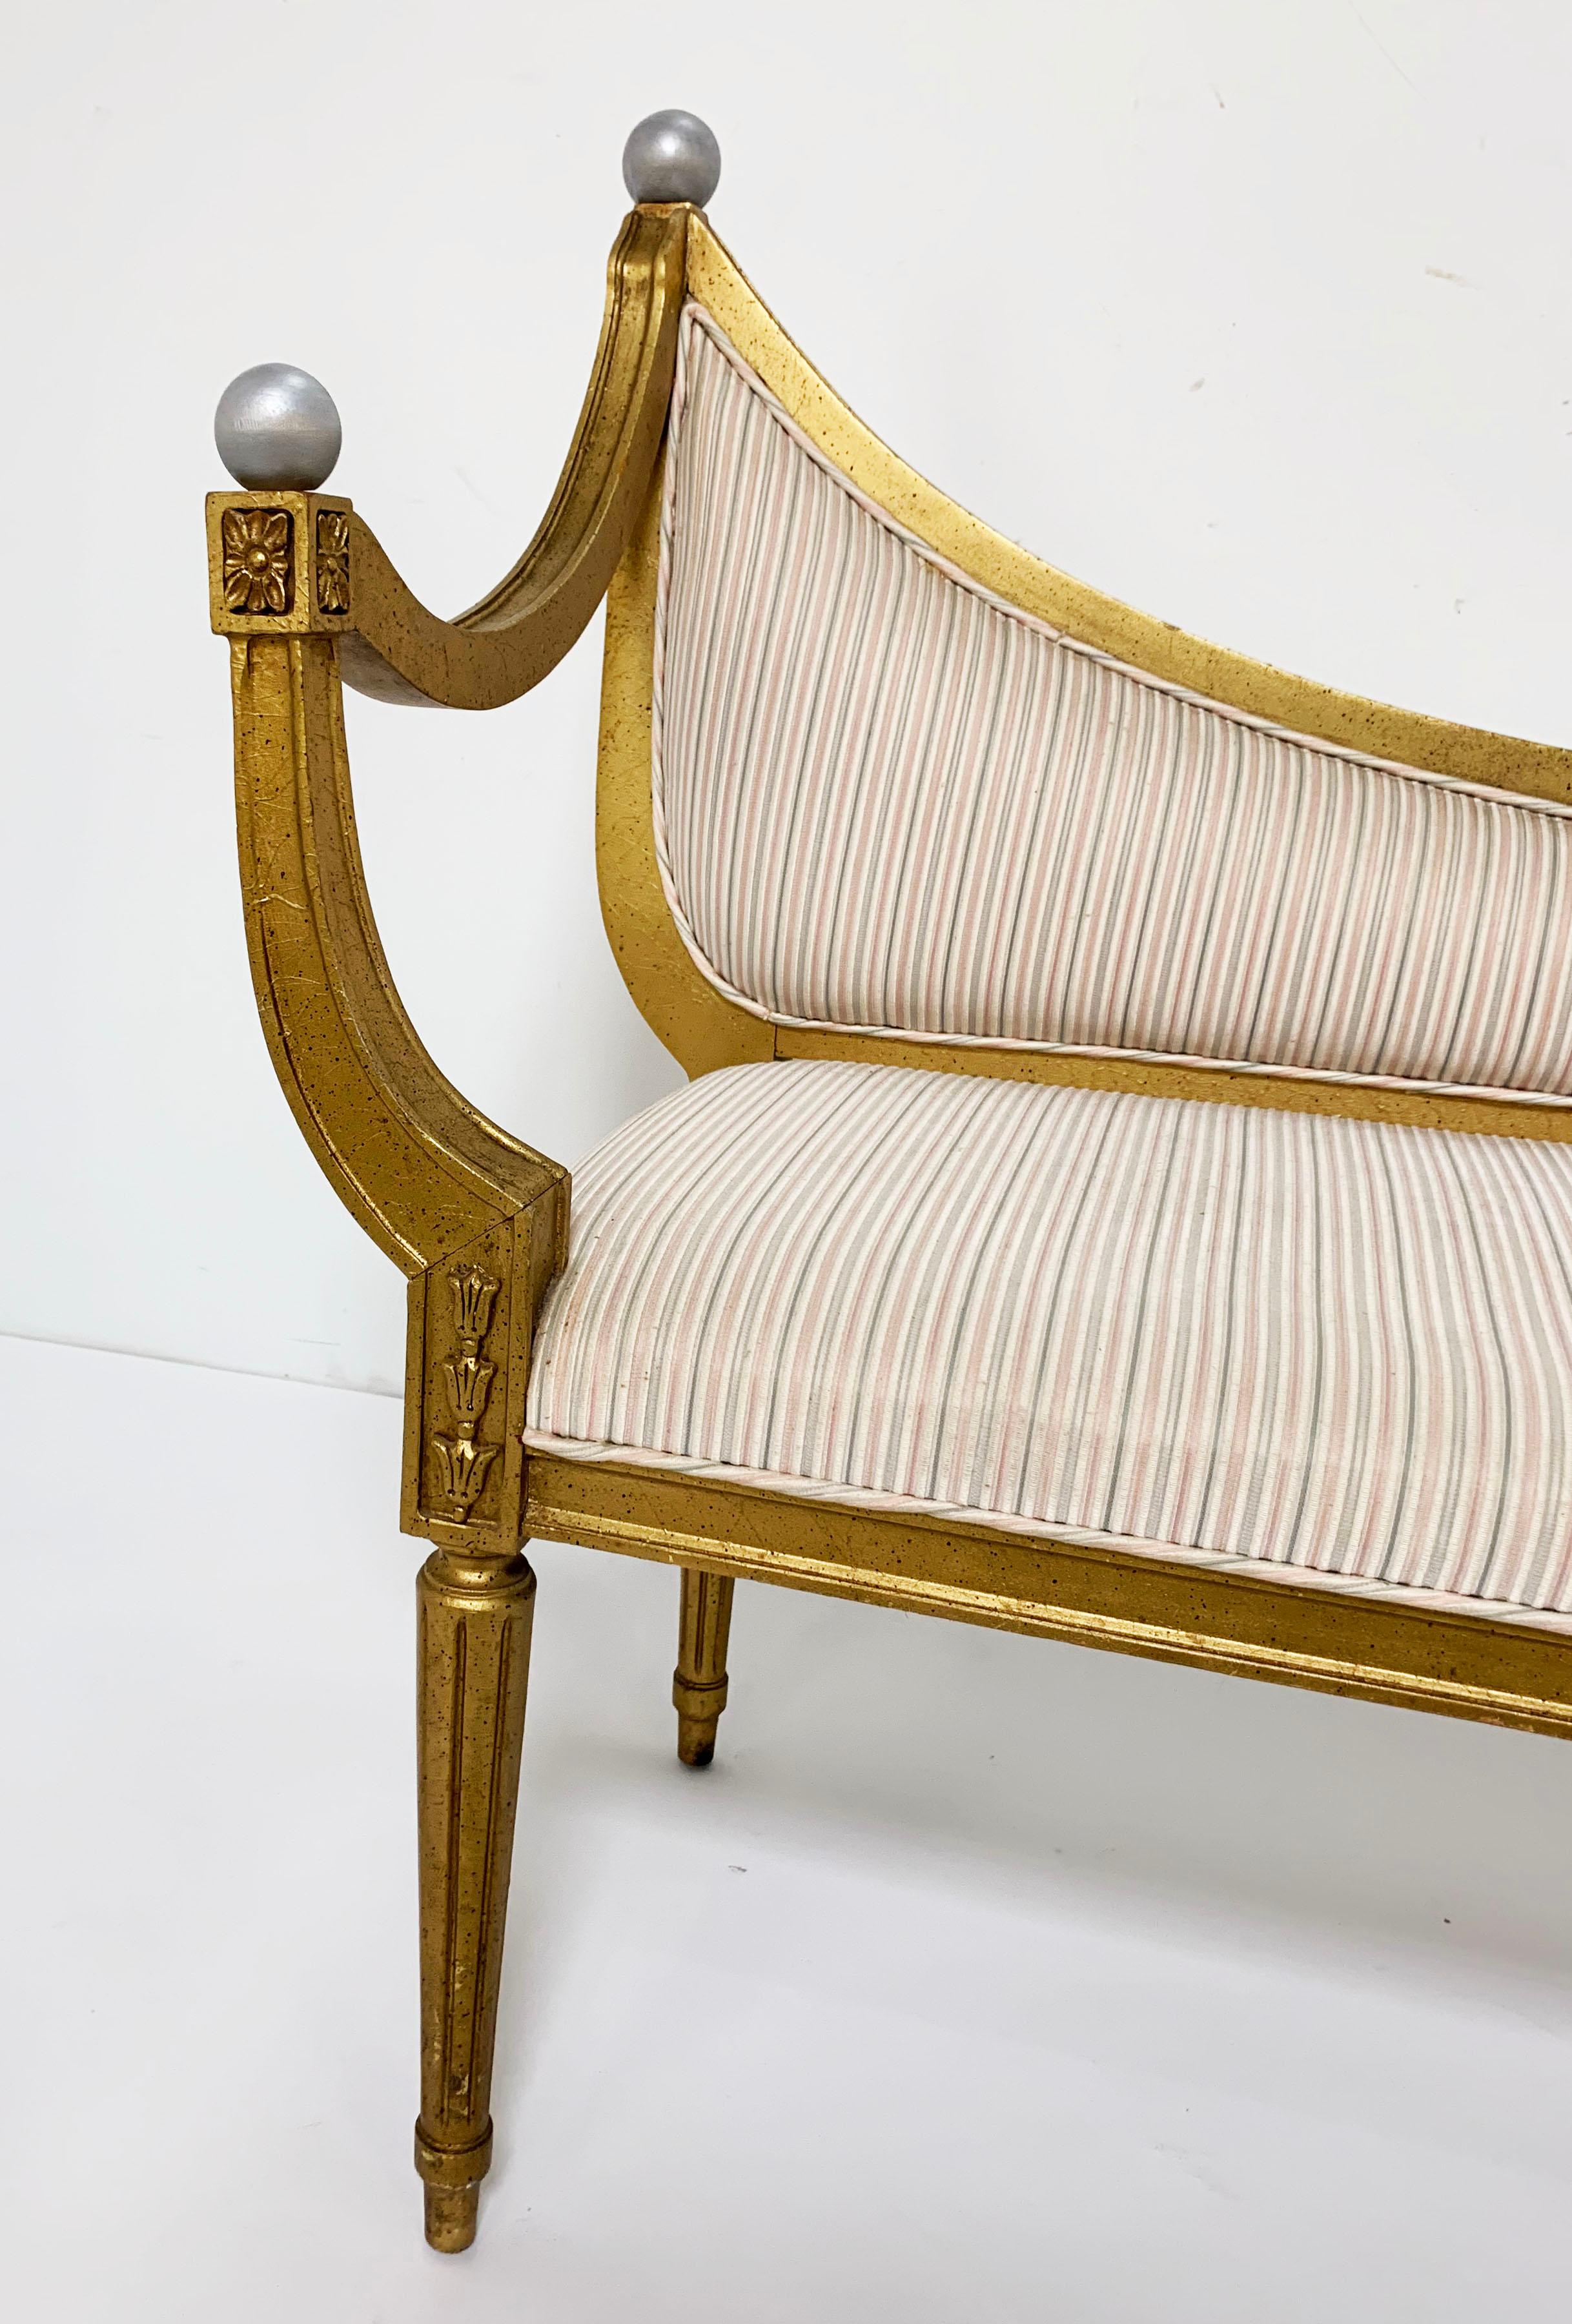 Midcentury giltwood settee in the neoclassical style. Unmarked, most likely Italian.